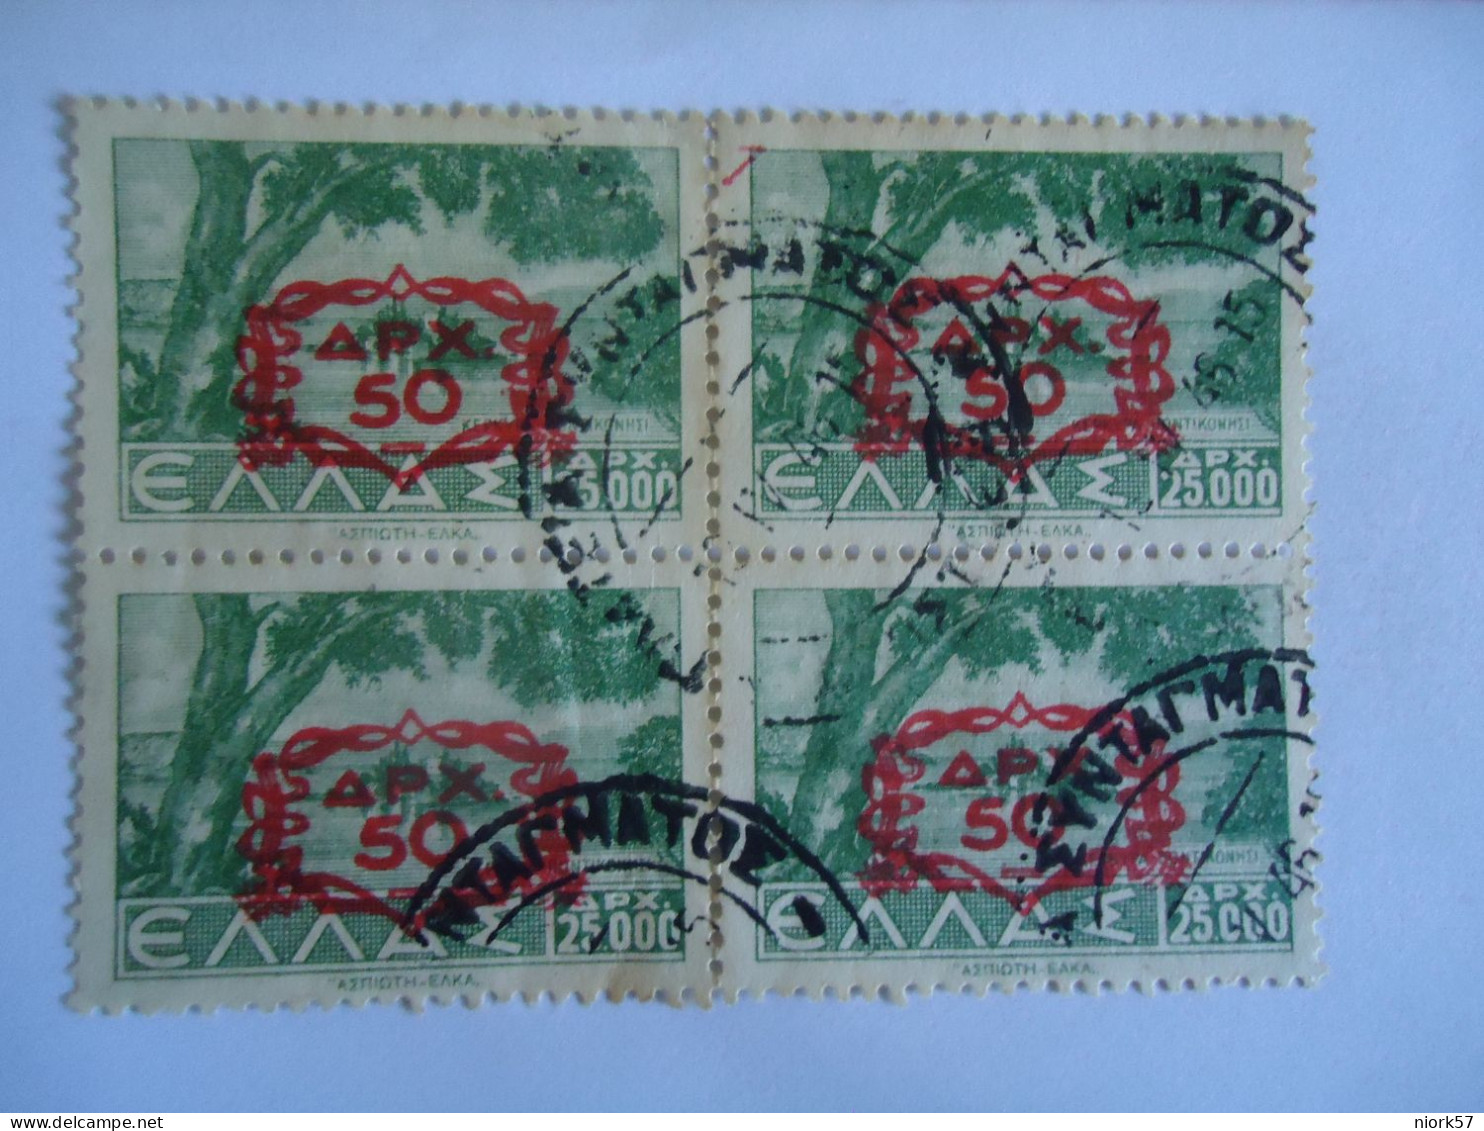 GREECE USED STAMPS  1946 OVERPRINT   BLOCK OF 4 POSTMARK  ΣΥΝΤΑΓΜΑ - Used Stamps